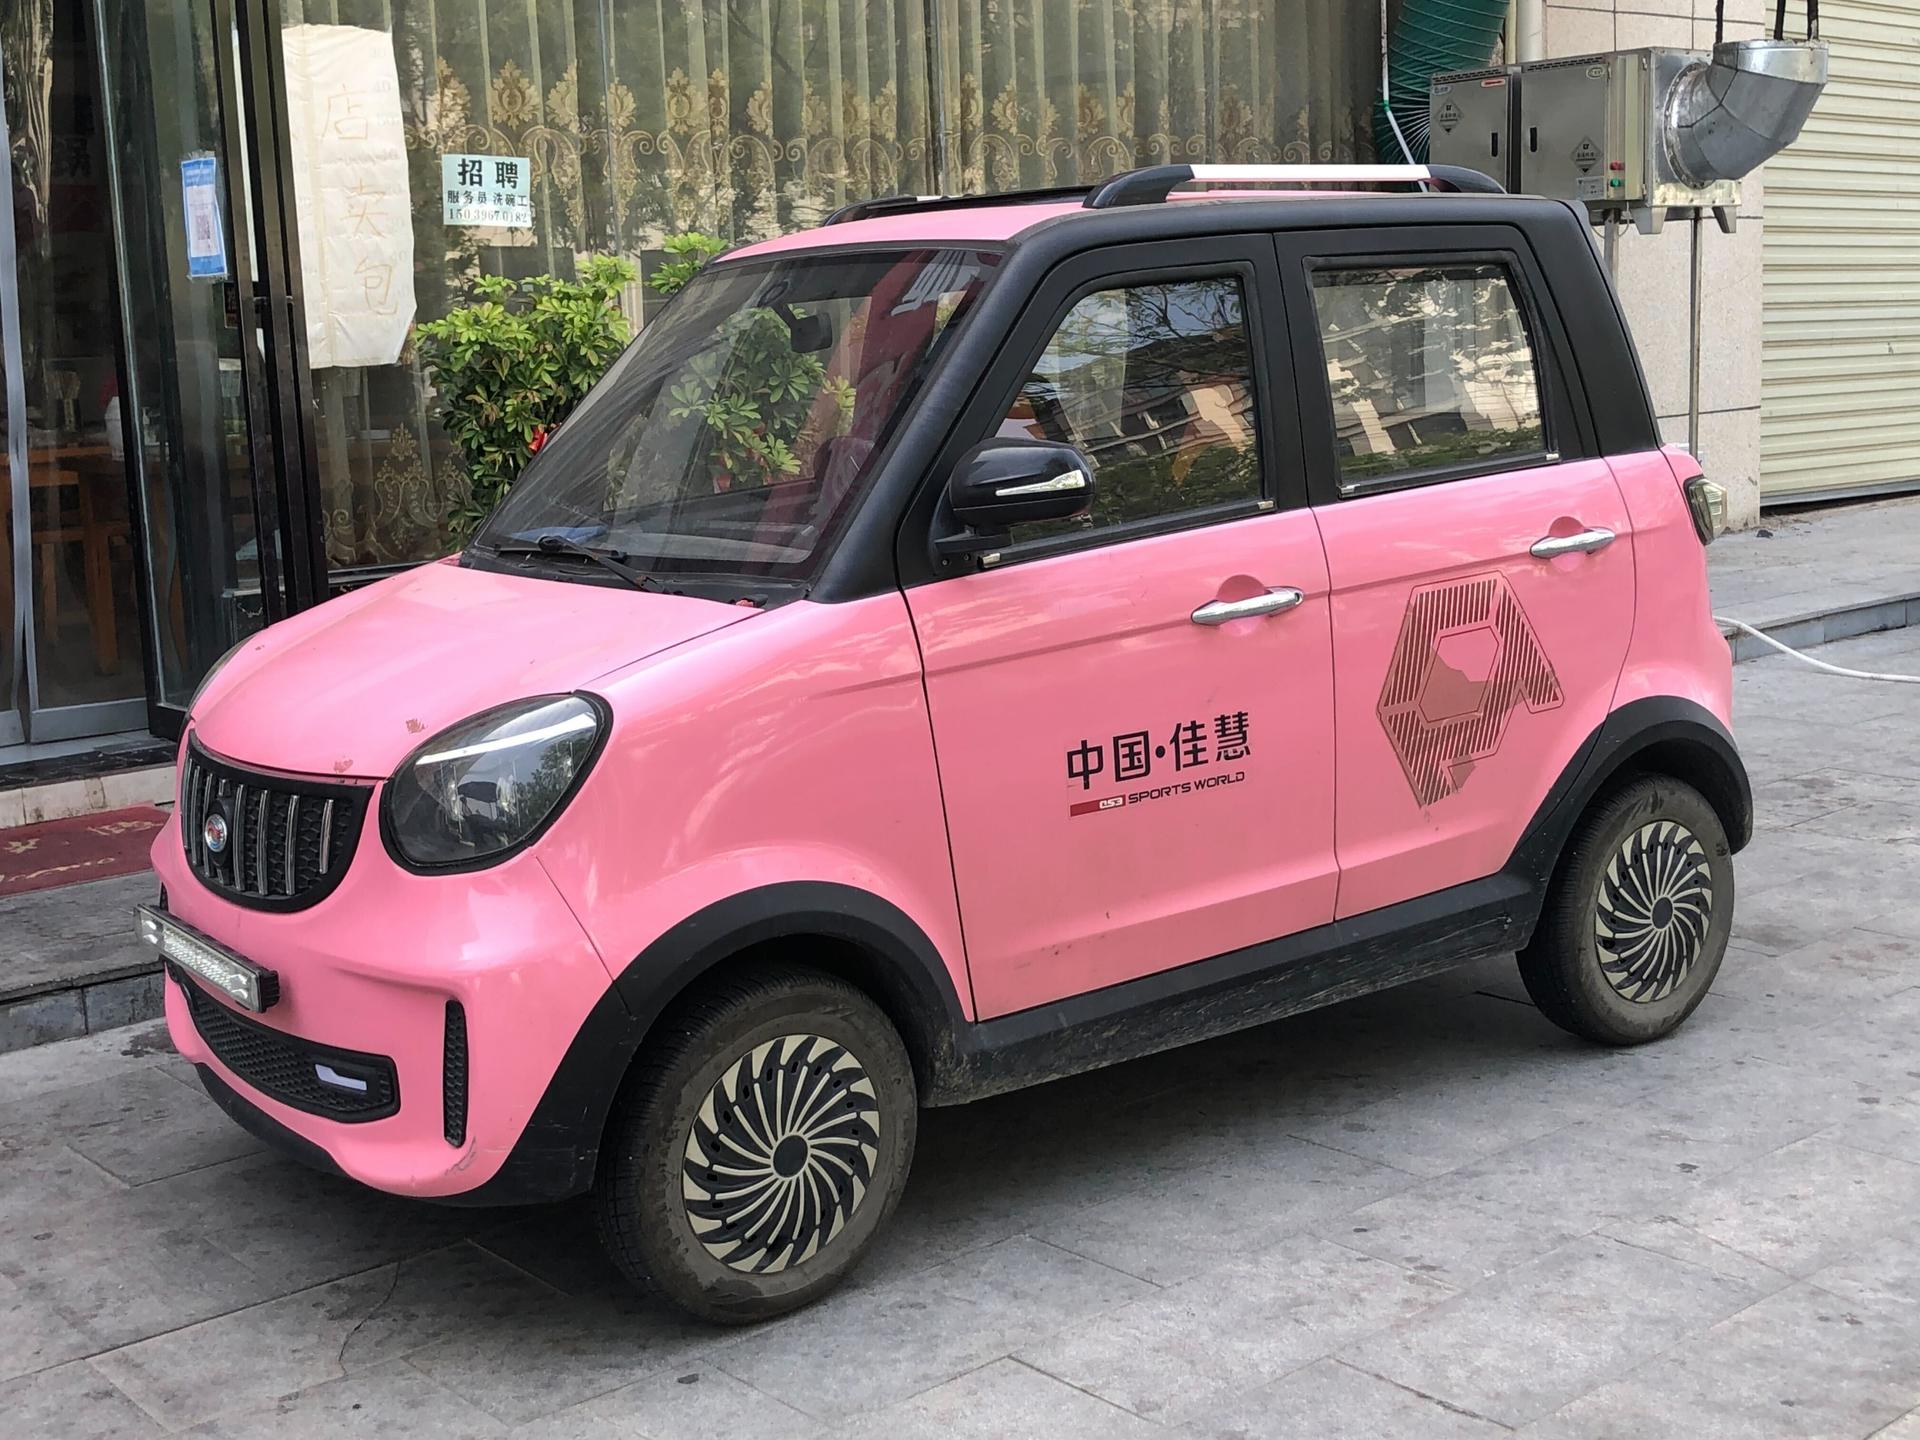 A mini-electric vehicle parked in the street, Zhumadian, China